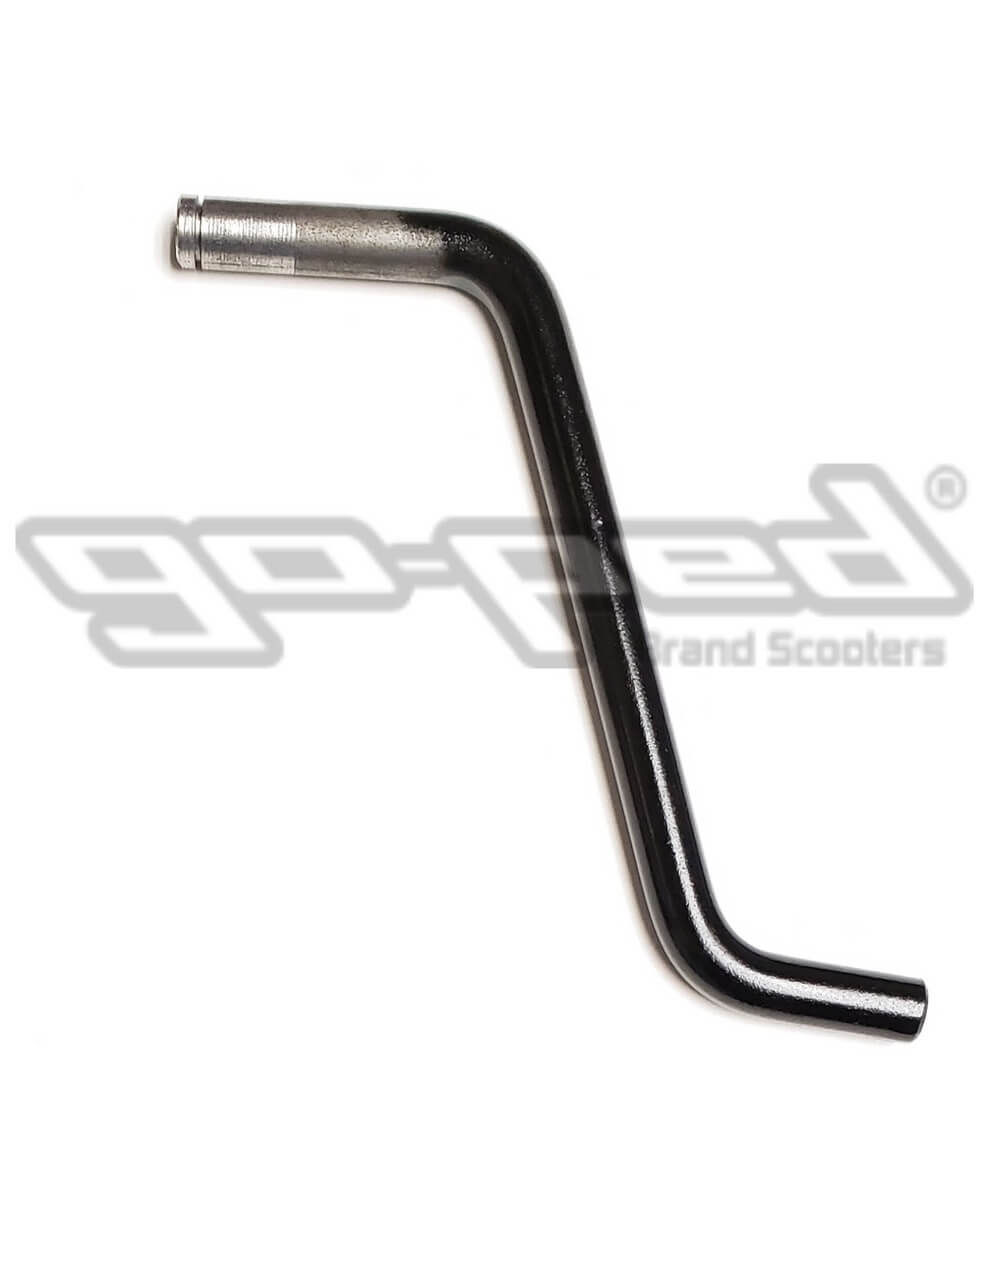 Go-Ped Replacement KICKSTAND 3.5" (8634) for Scooters